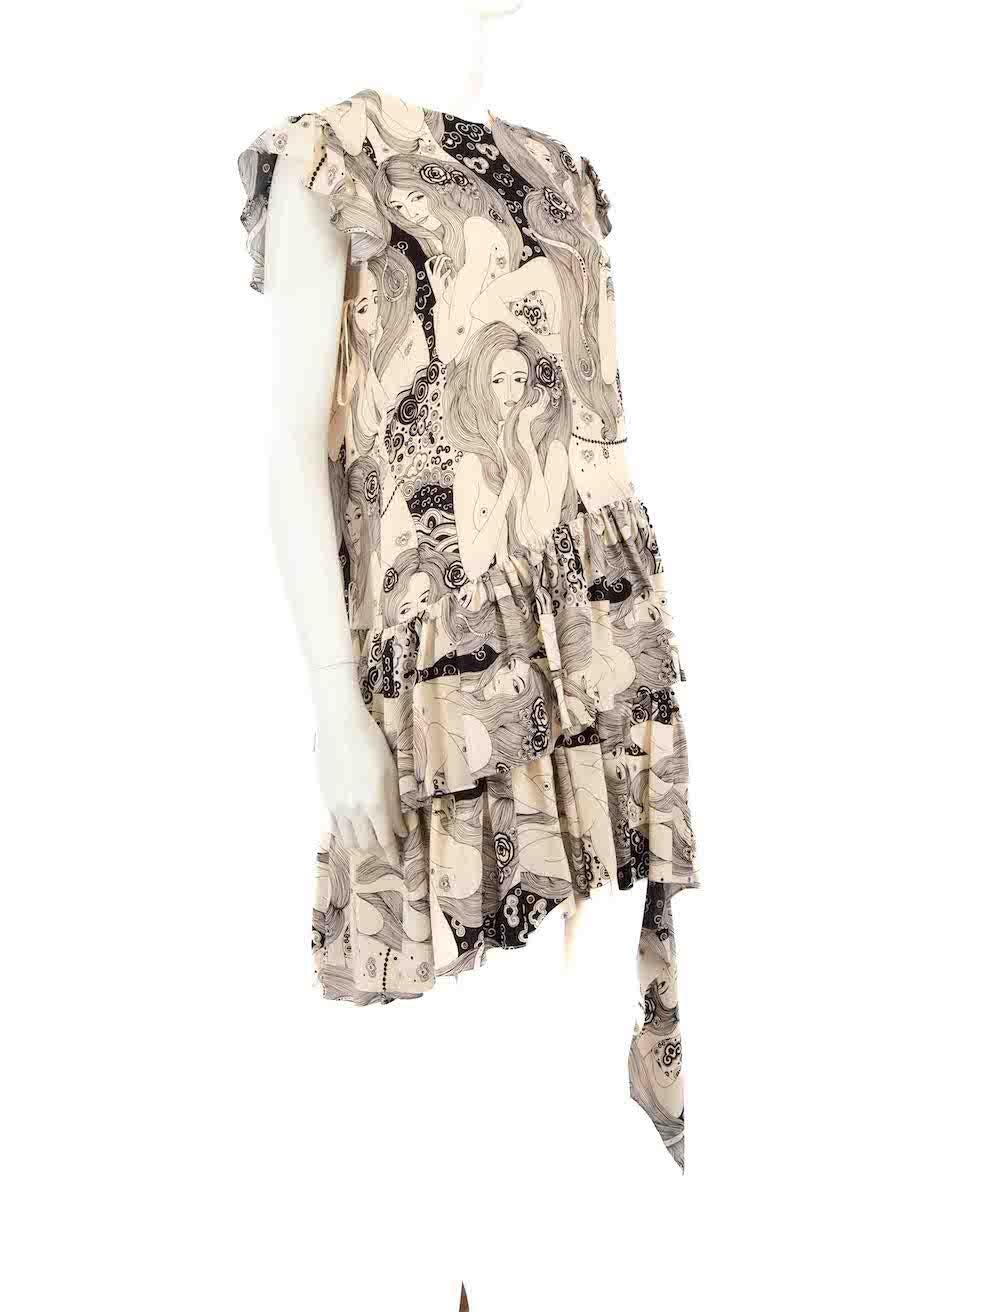 CONDITION is Very good. Hardly any visible wear to dress is evident on this used Alexander McQueen designer resale item.
 
 
 
 Details
 
 
 Beige
 
 Silk
 
 Dress
 
 Black Eve print
 
 Round neck
 
 Sleeveless
 
 Ruffle trim
 
 Back zip fastening
